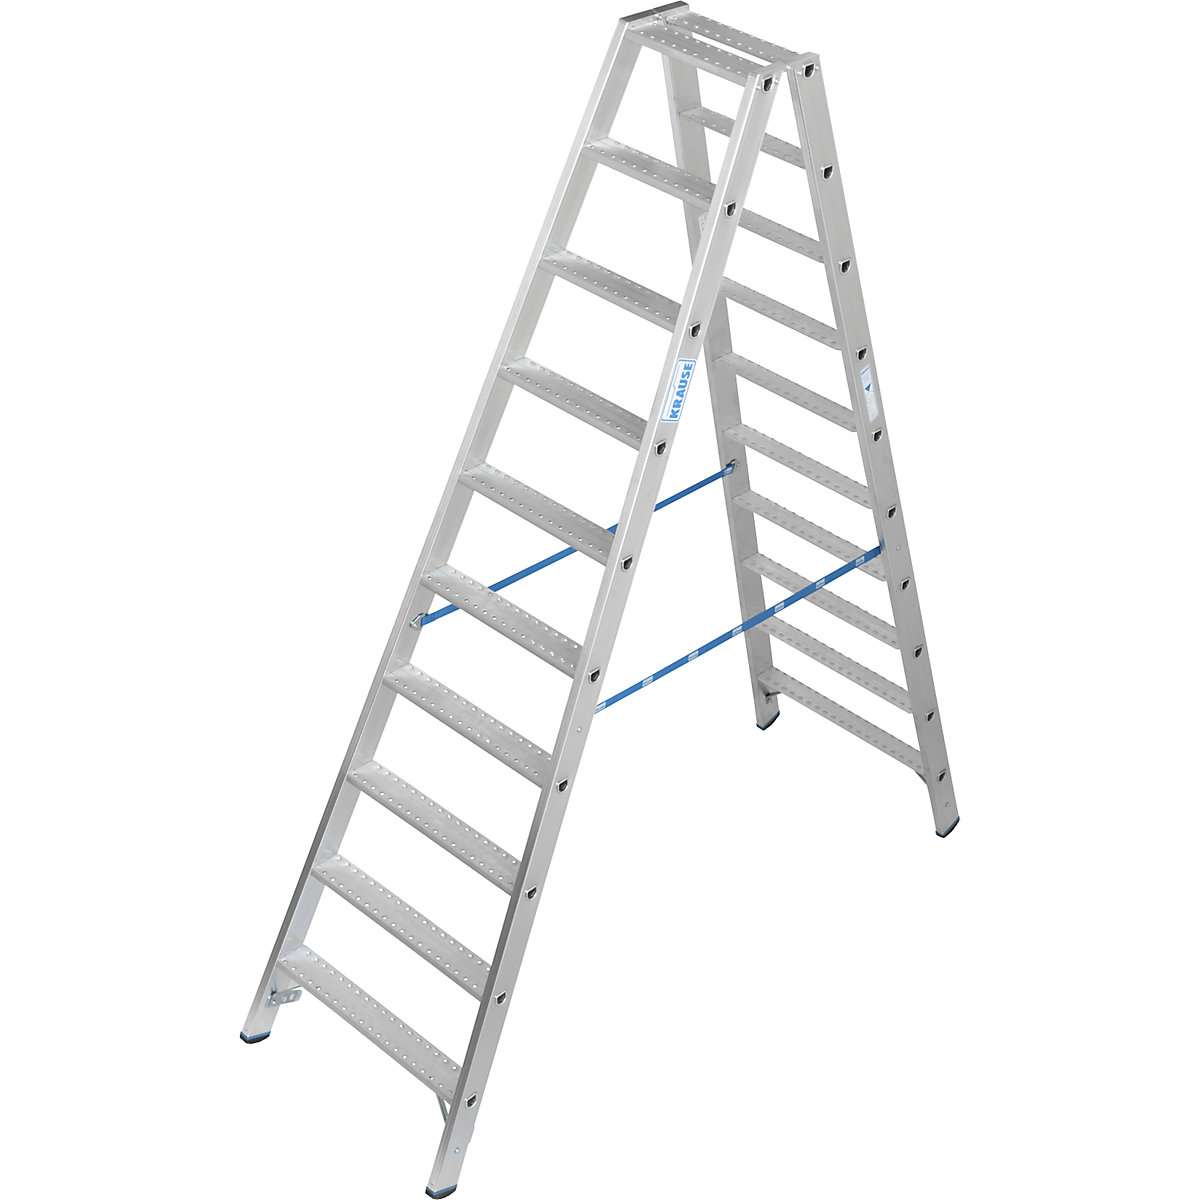 Aluminium stepladder, with R13 anti-slip properties – KRAUSE, double sided access, 2x10 steps-5